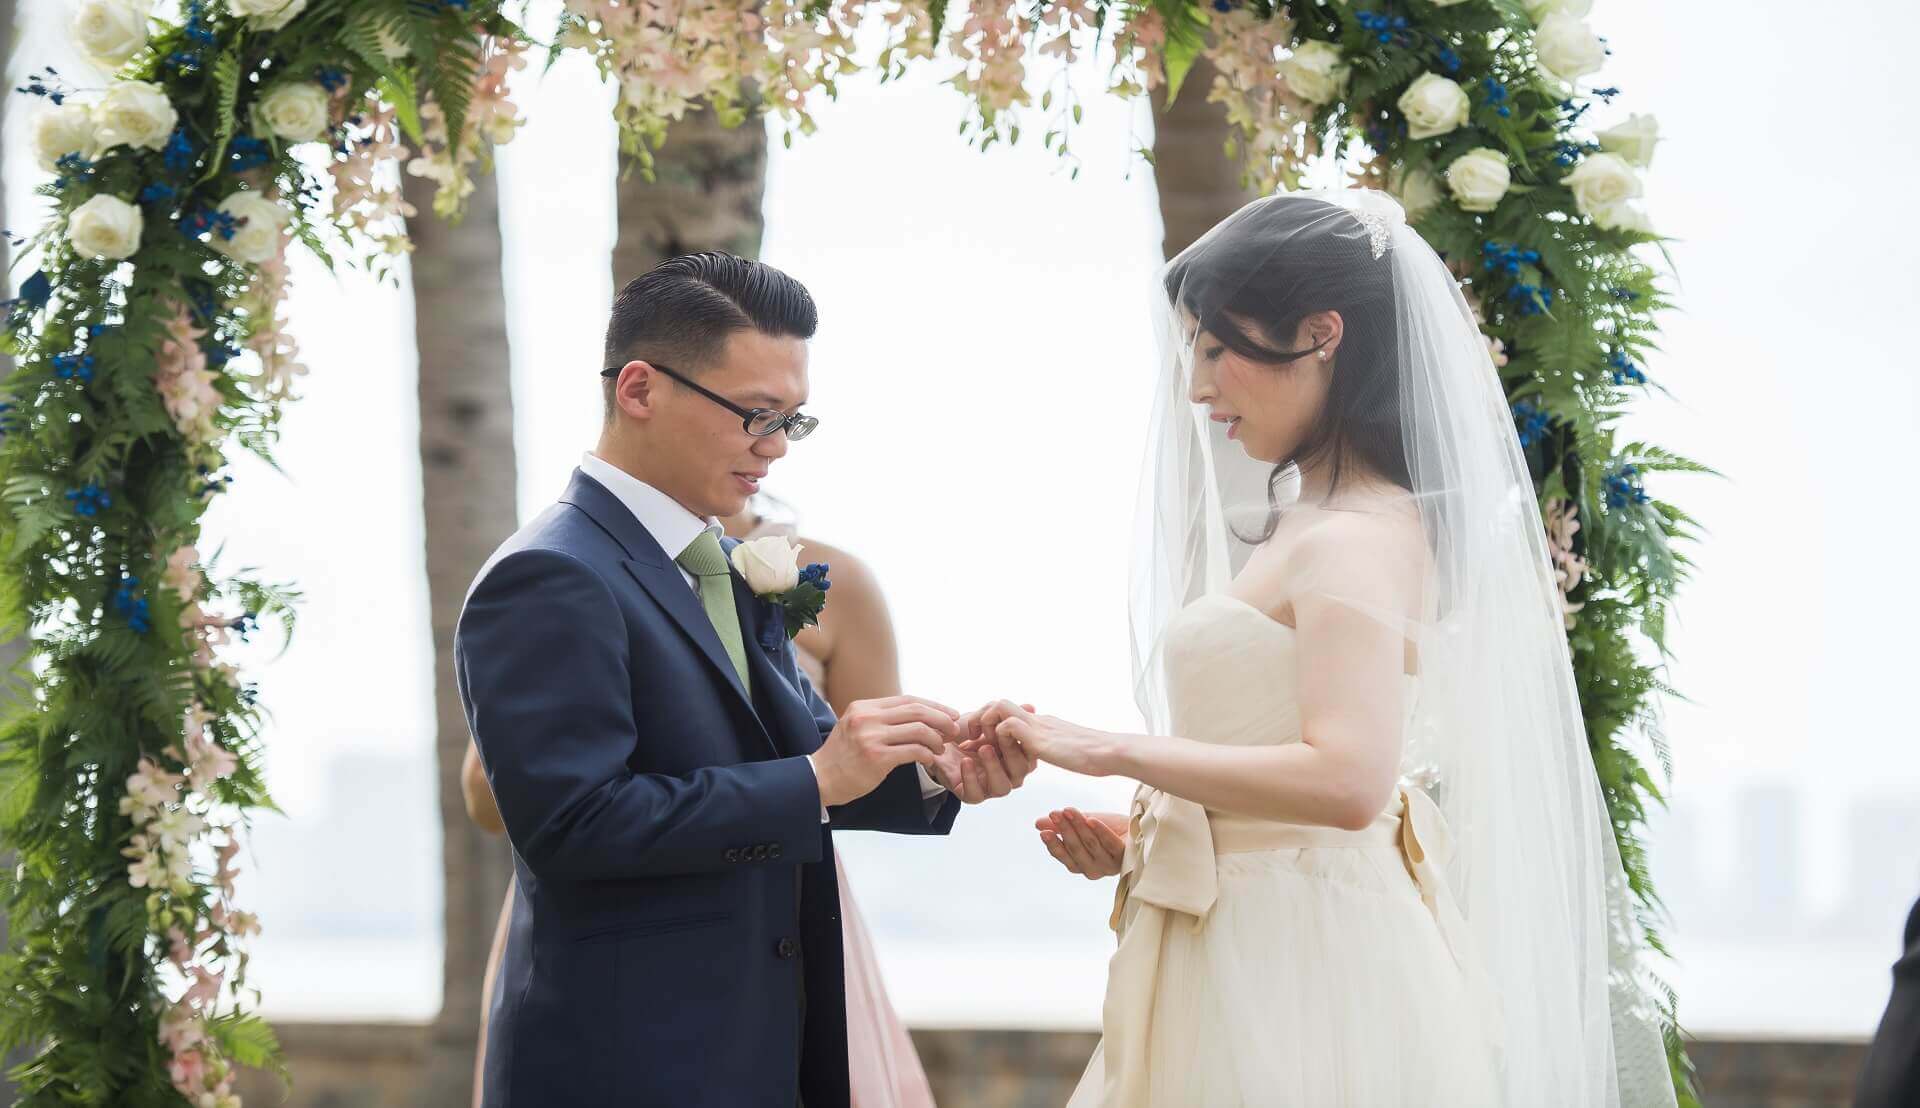 Sugar & Spice Events - Couple exchange wedding ring in the ceremony